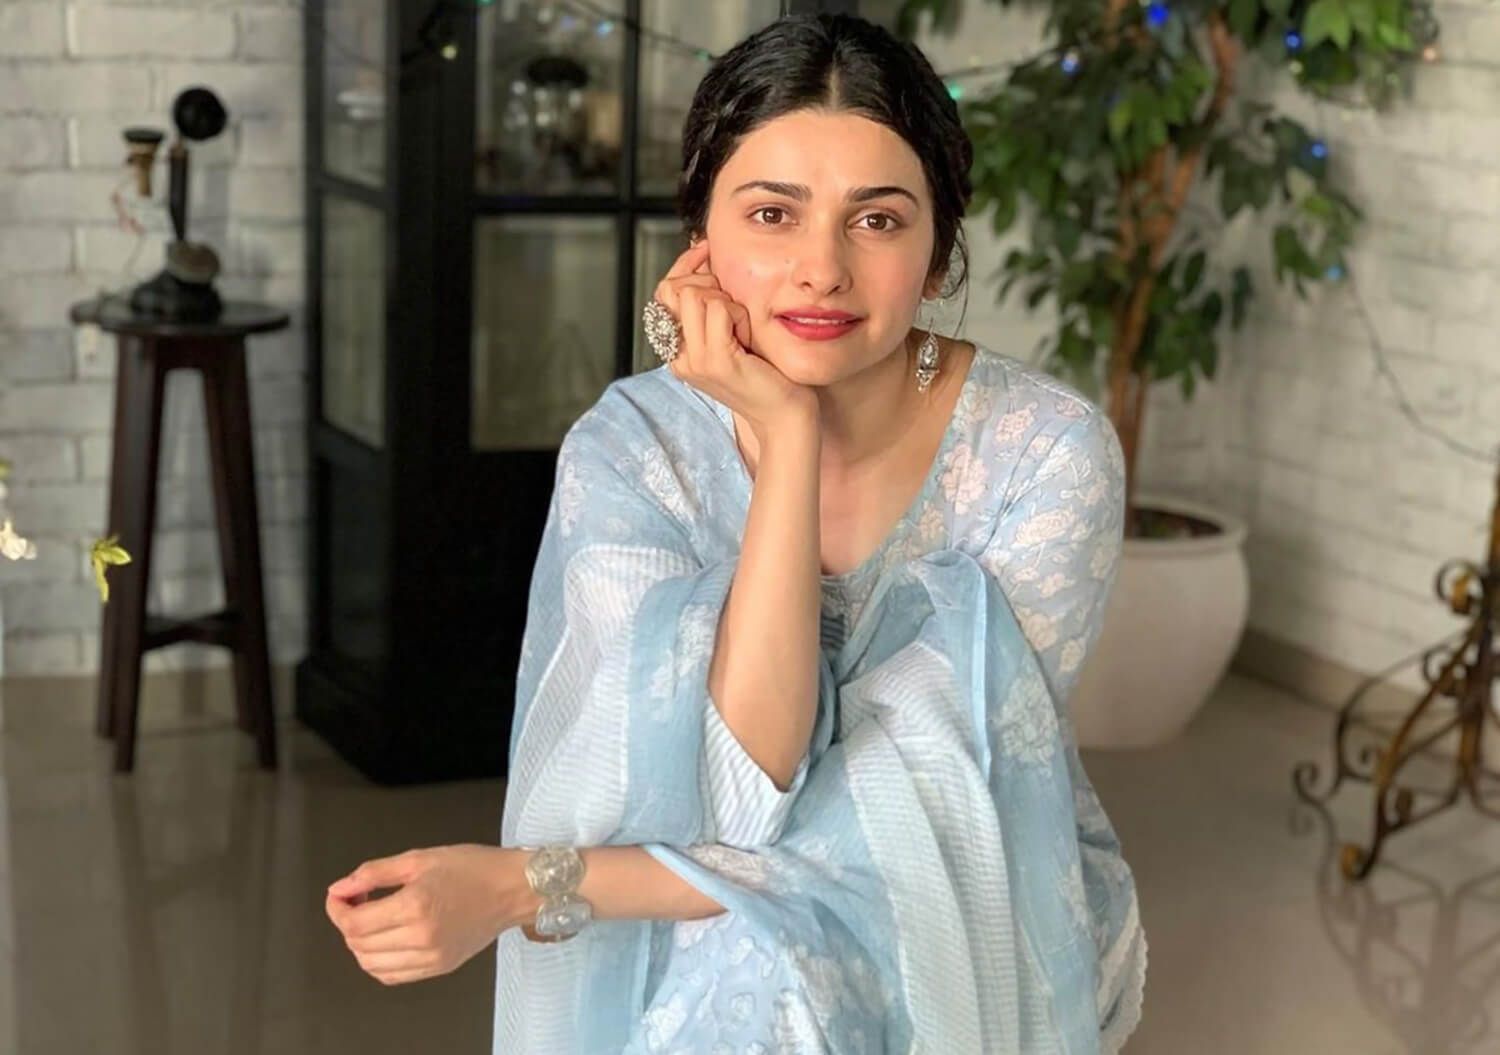 Prachi Desai Says She 'Won’t Mind Being Married A Few Years Later', But Can't Give Up Her Independence For It Right Now